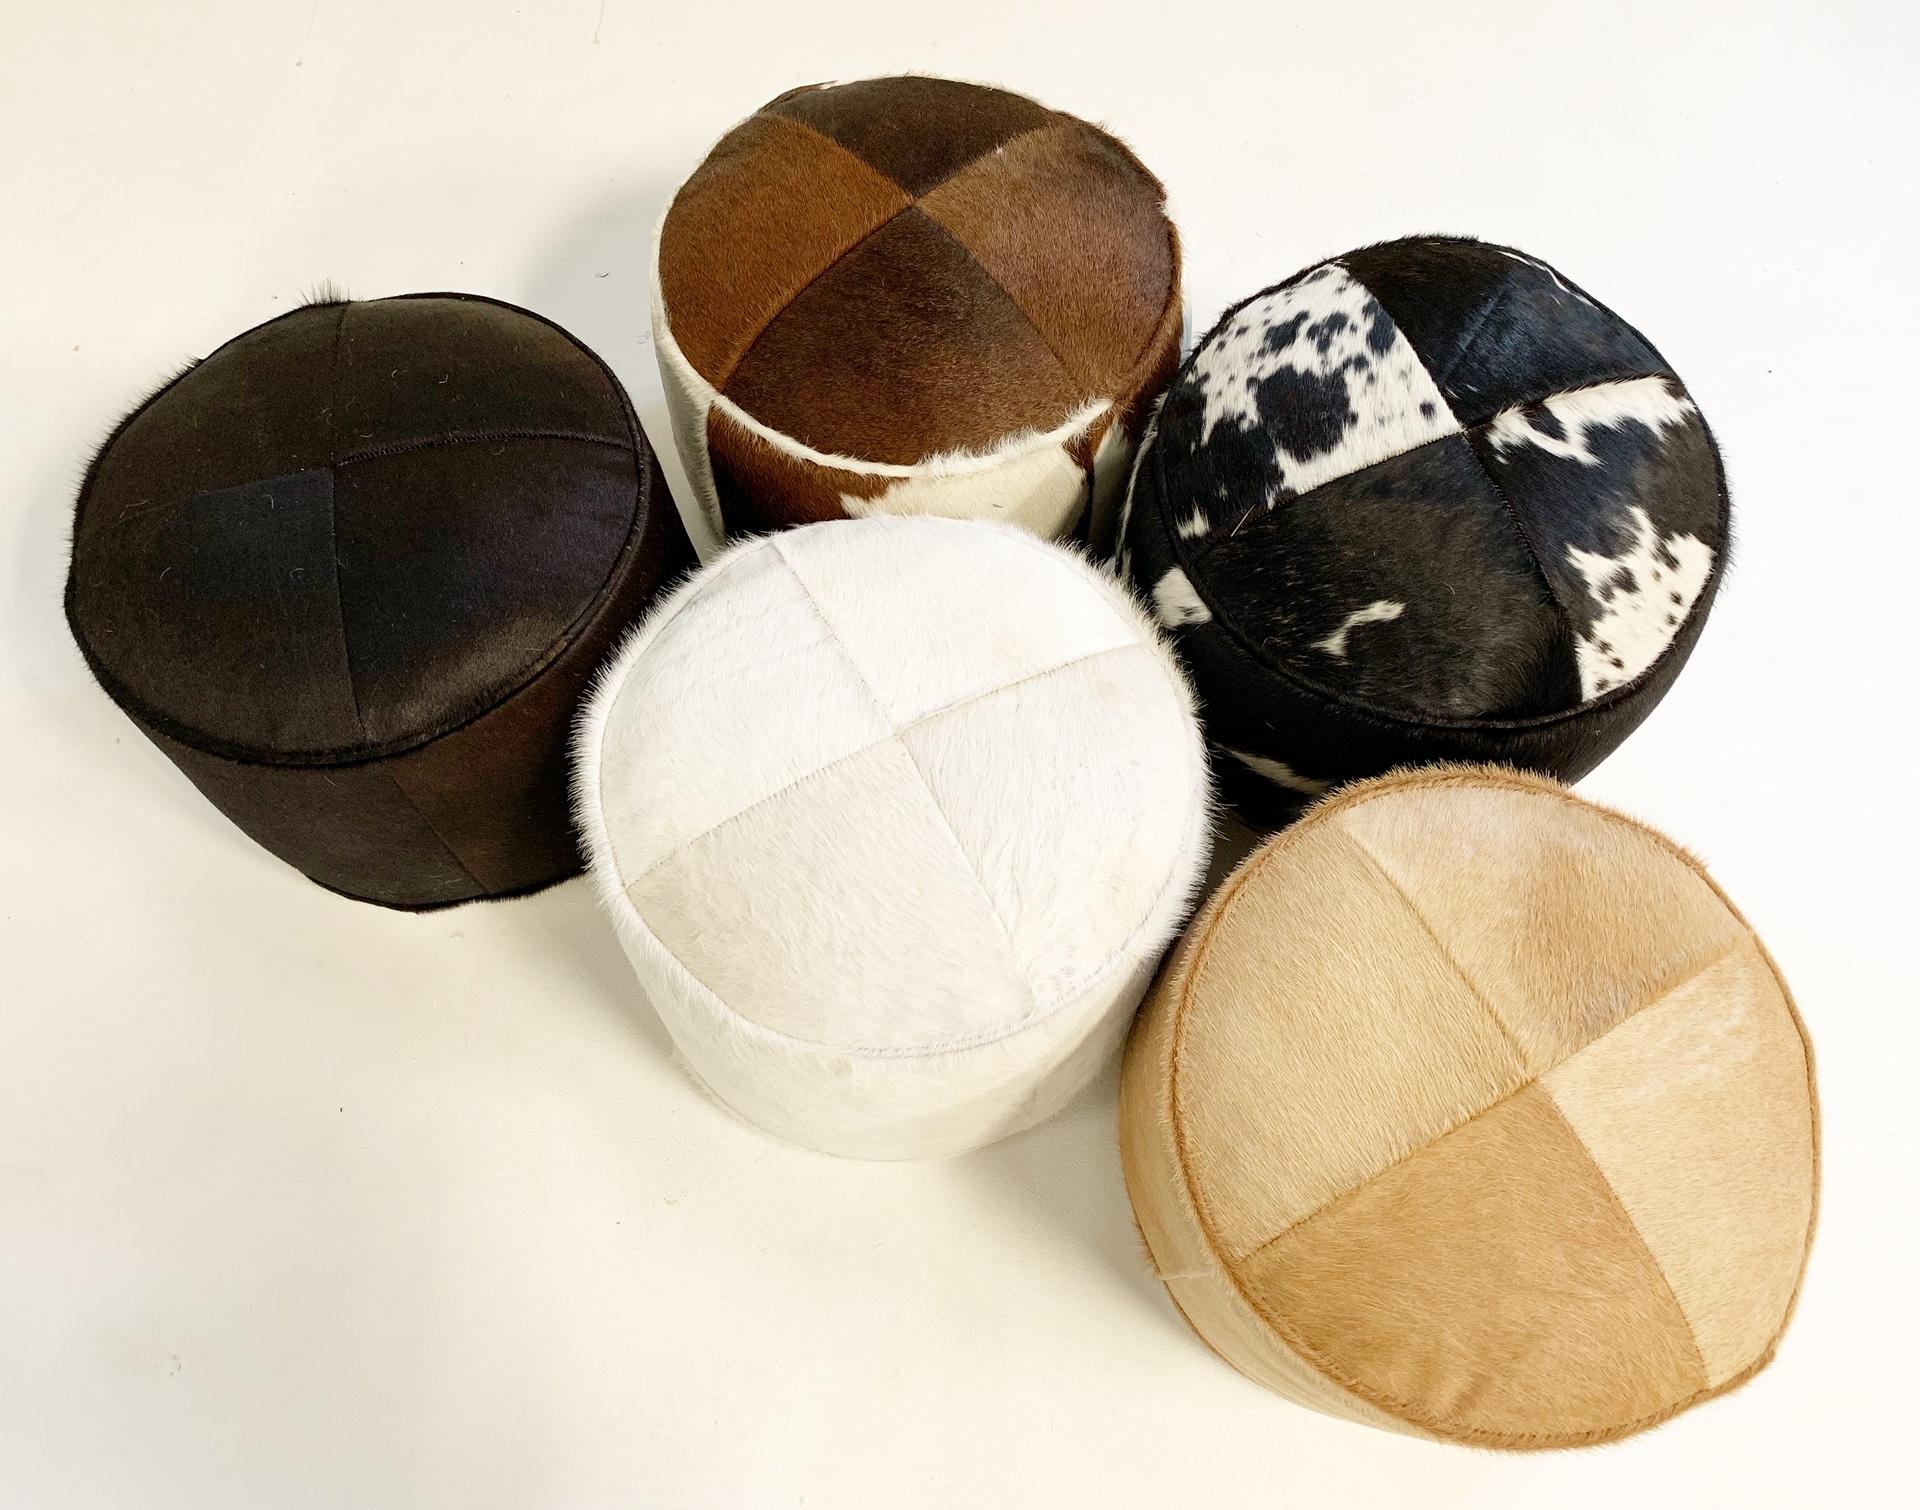 Our luxurious cowhide pouf ottomans are handcrafted from our beautiful Forsyth Brazilian cowhides. The most beautiful cowhides are selected handcut, hand stitched and hand stuffed. Down feathers fill each pouf, 12 pounds to be exact and each is